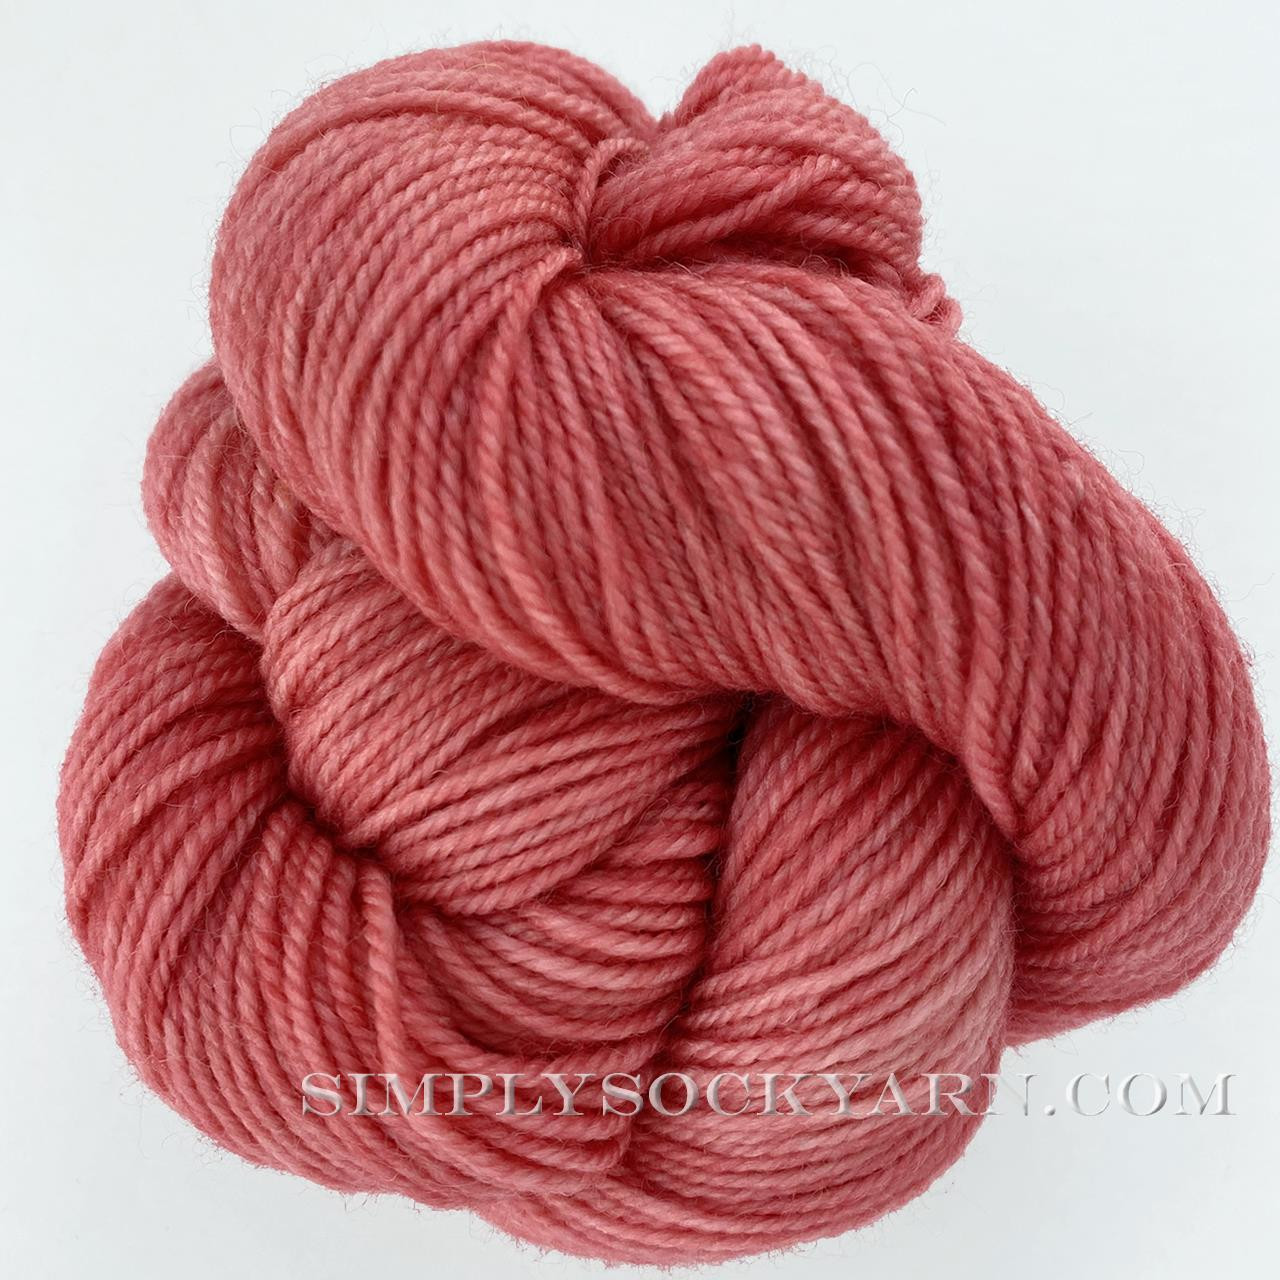 SSY Solid 233 Pink -